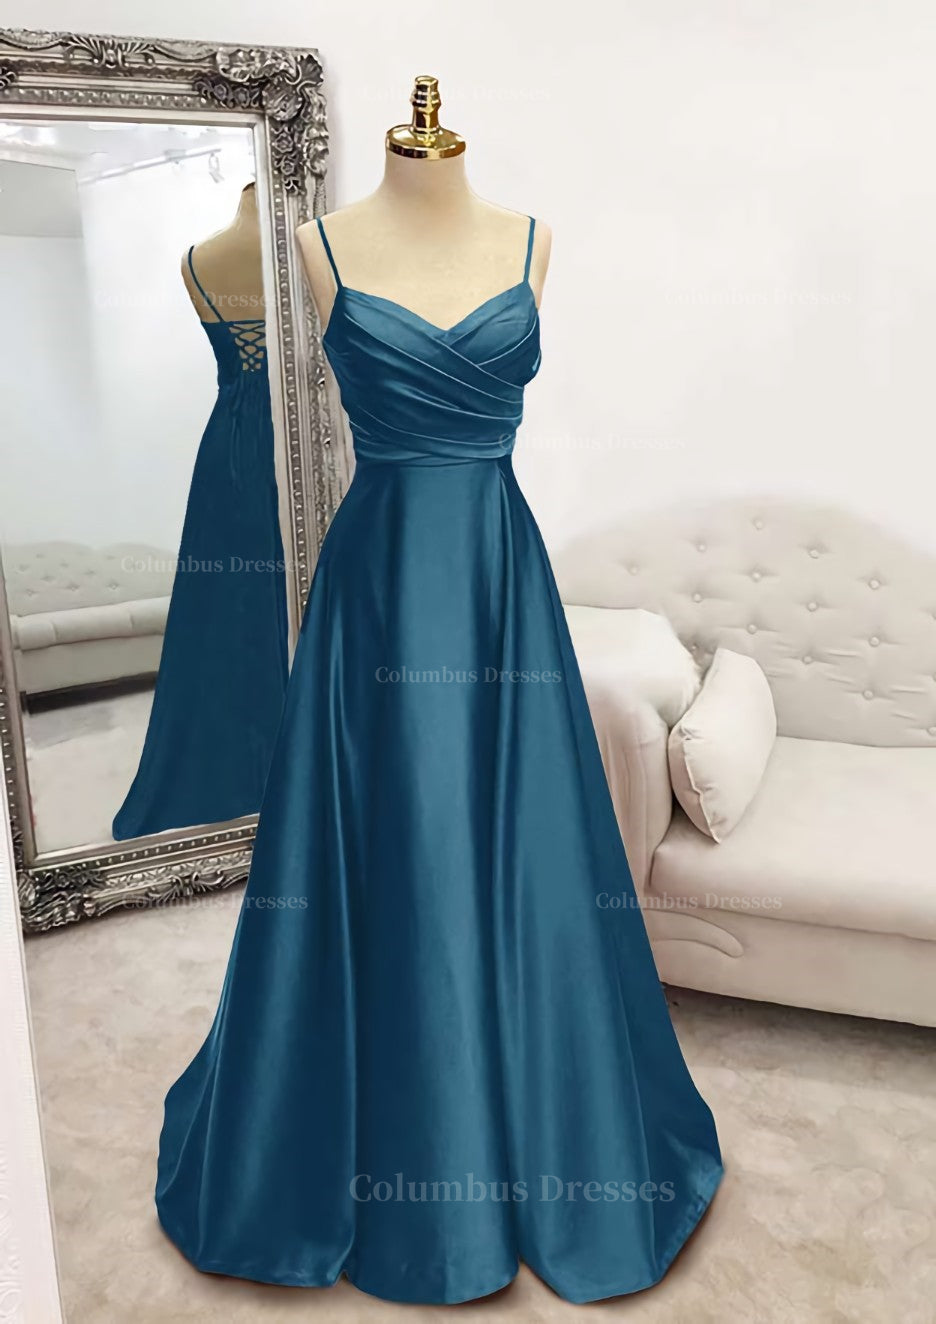 Prom Dress Princess Style, A-line V Neck Spaghetti Straps Long/Floor-Length Satin Prom Dress With Pleated